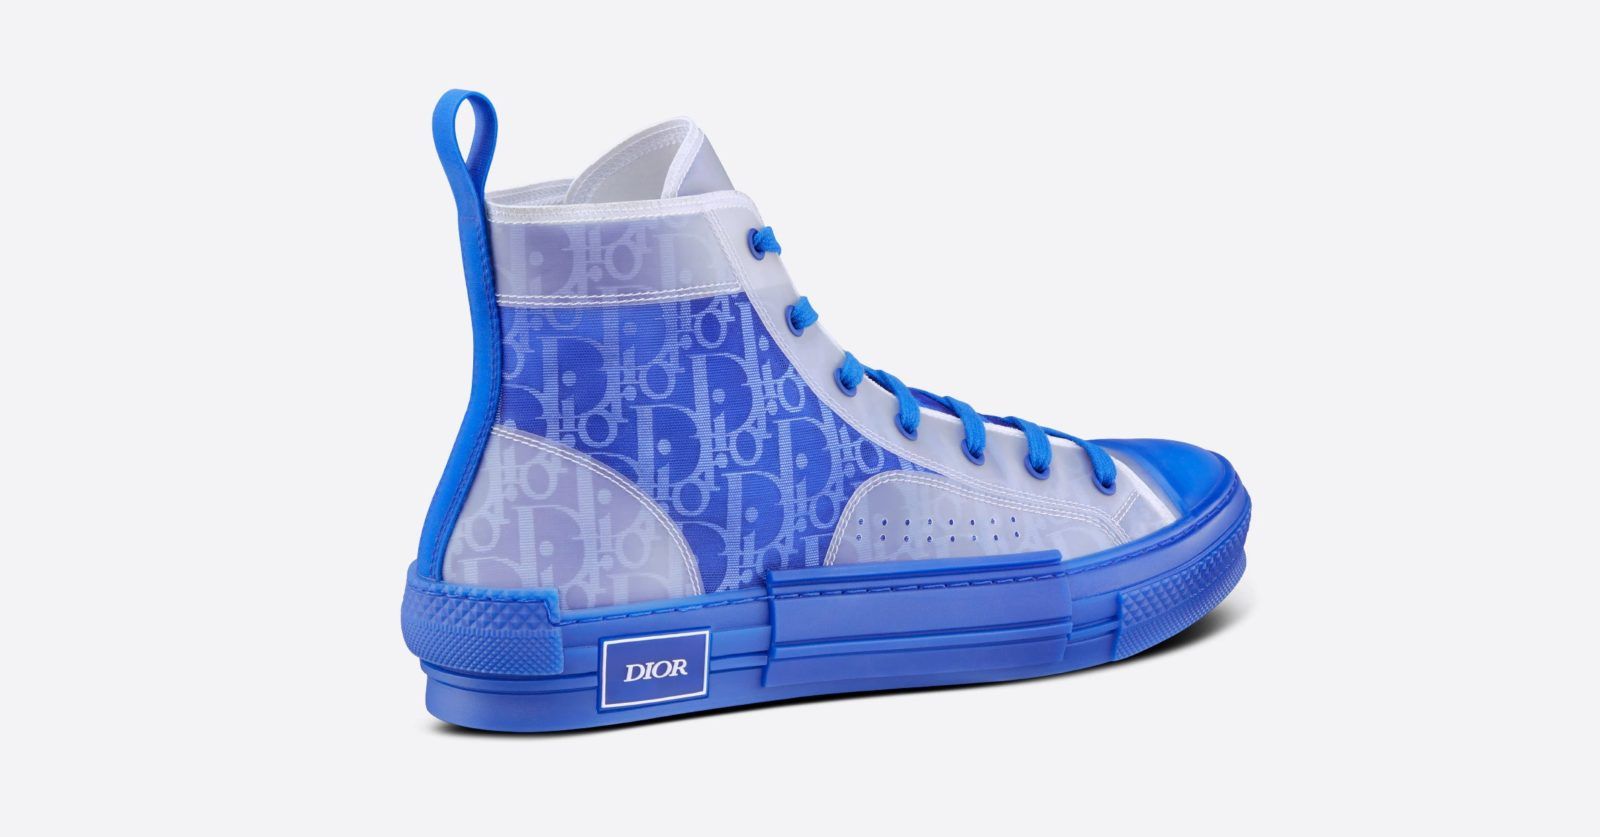 Dior drops the B23 sneakers in blue, and more new shoes we love